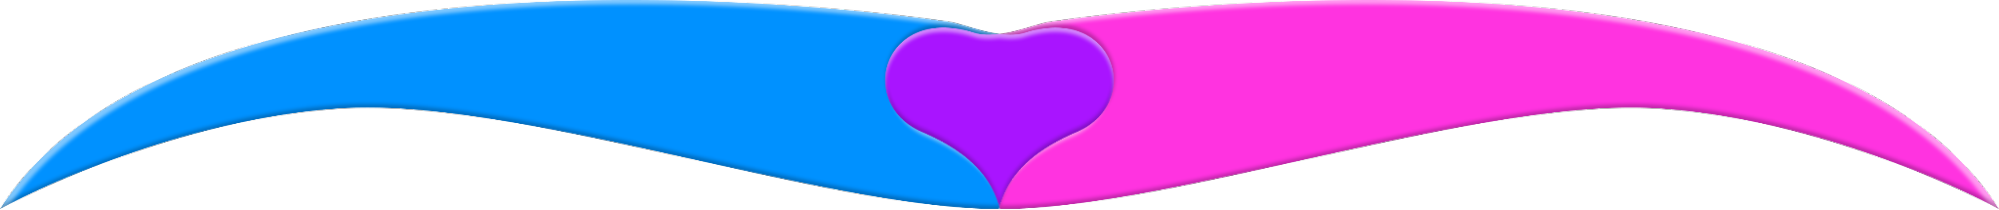 Page divider visual element. The CPHUX blue and pink colours are crossing over creating a purple heart where they overlay. 